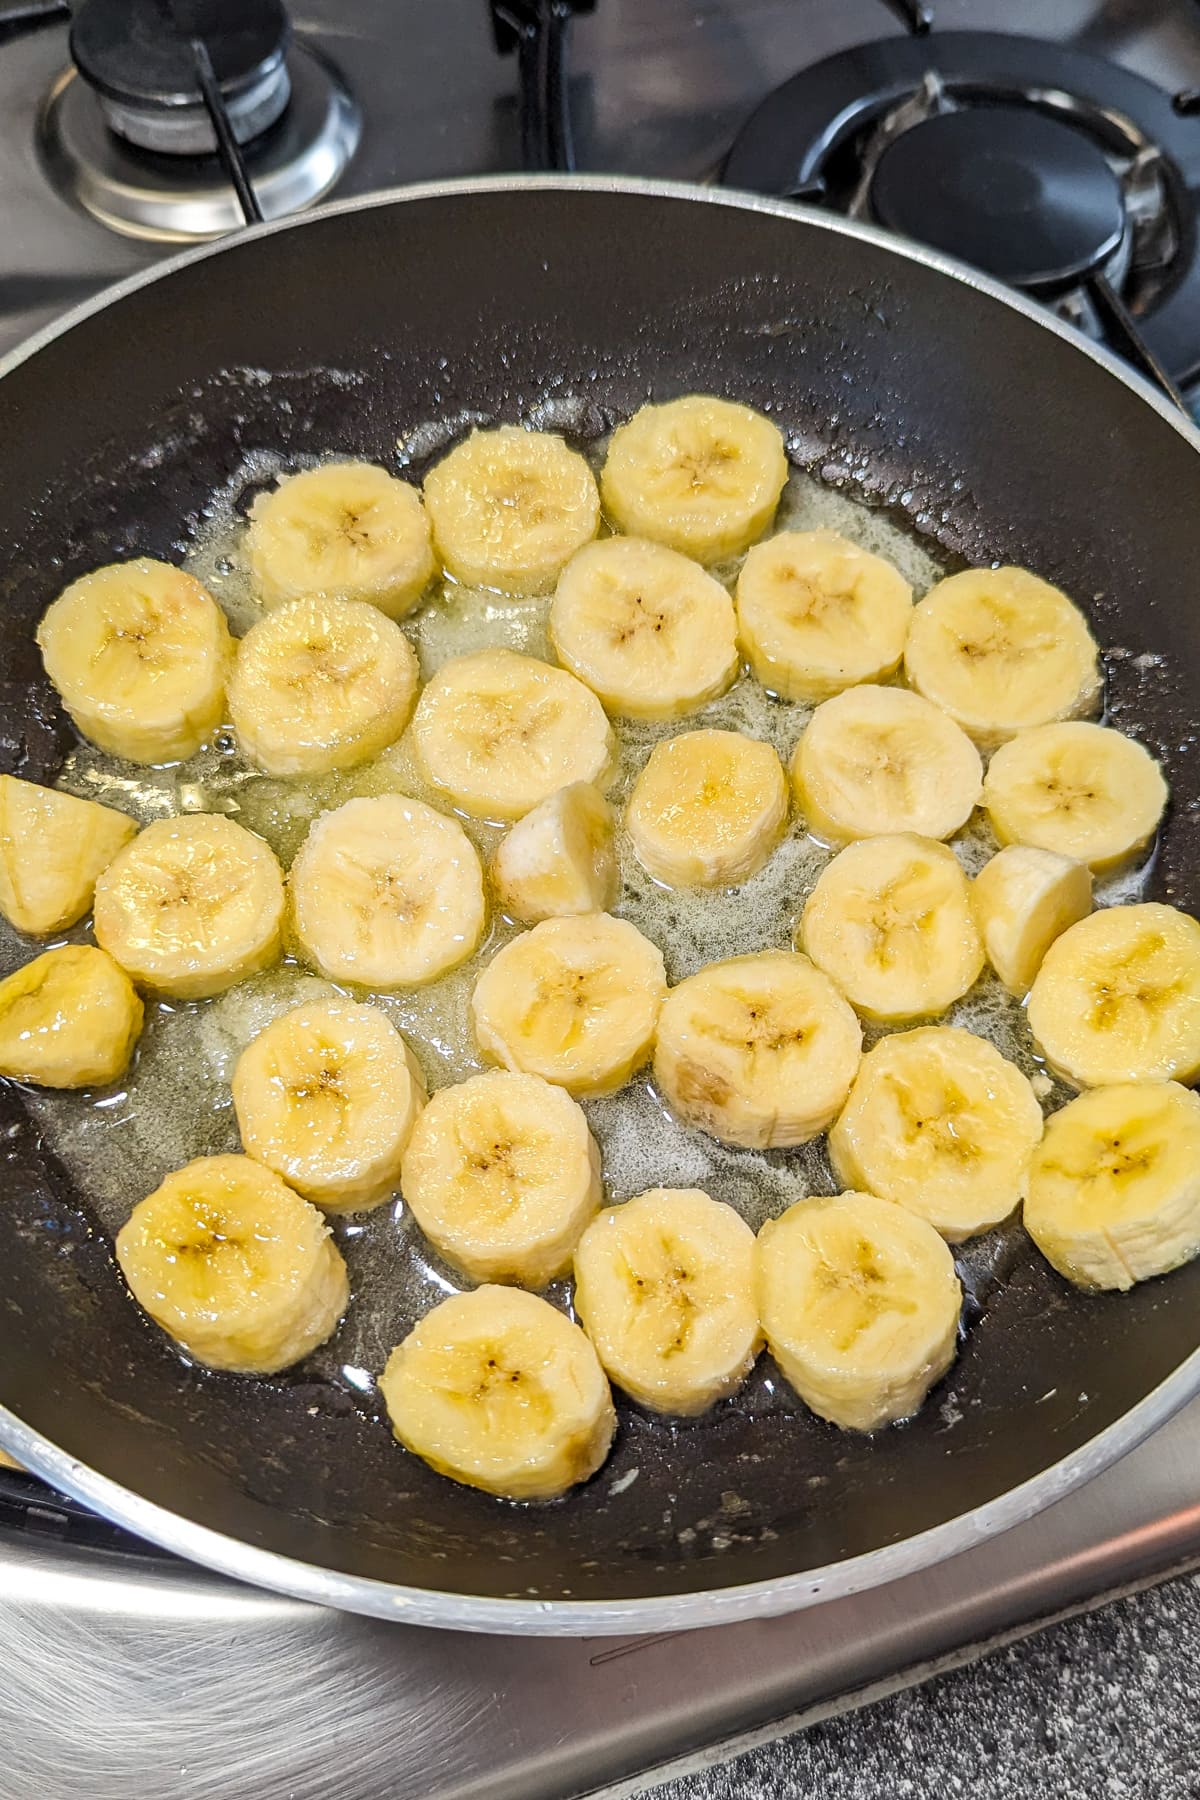 Caramelizing sliced bananas in melted sugar in a frying pan.